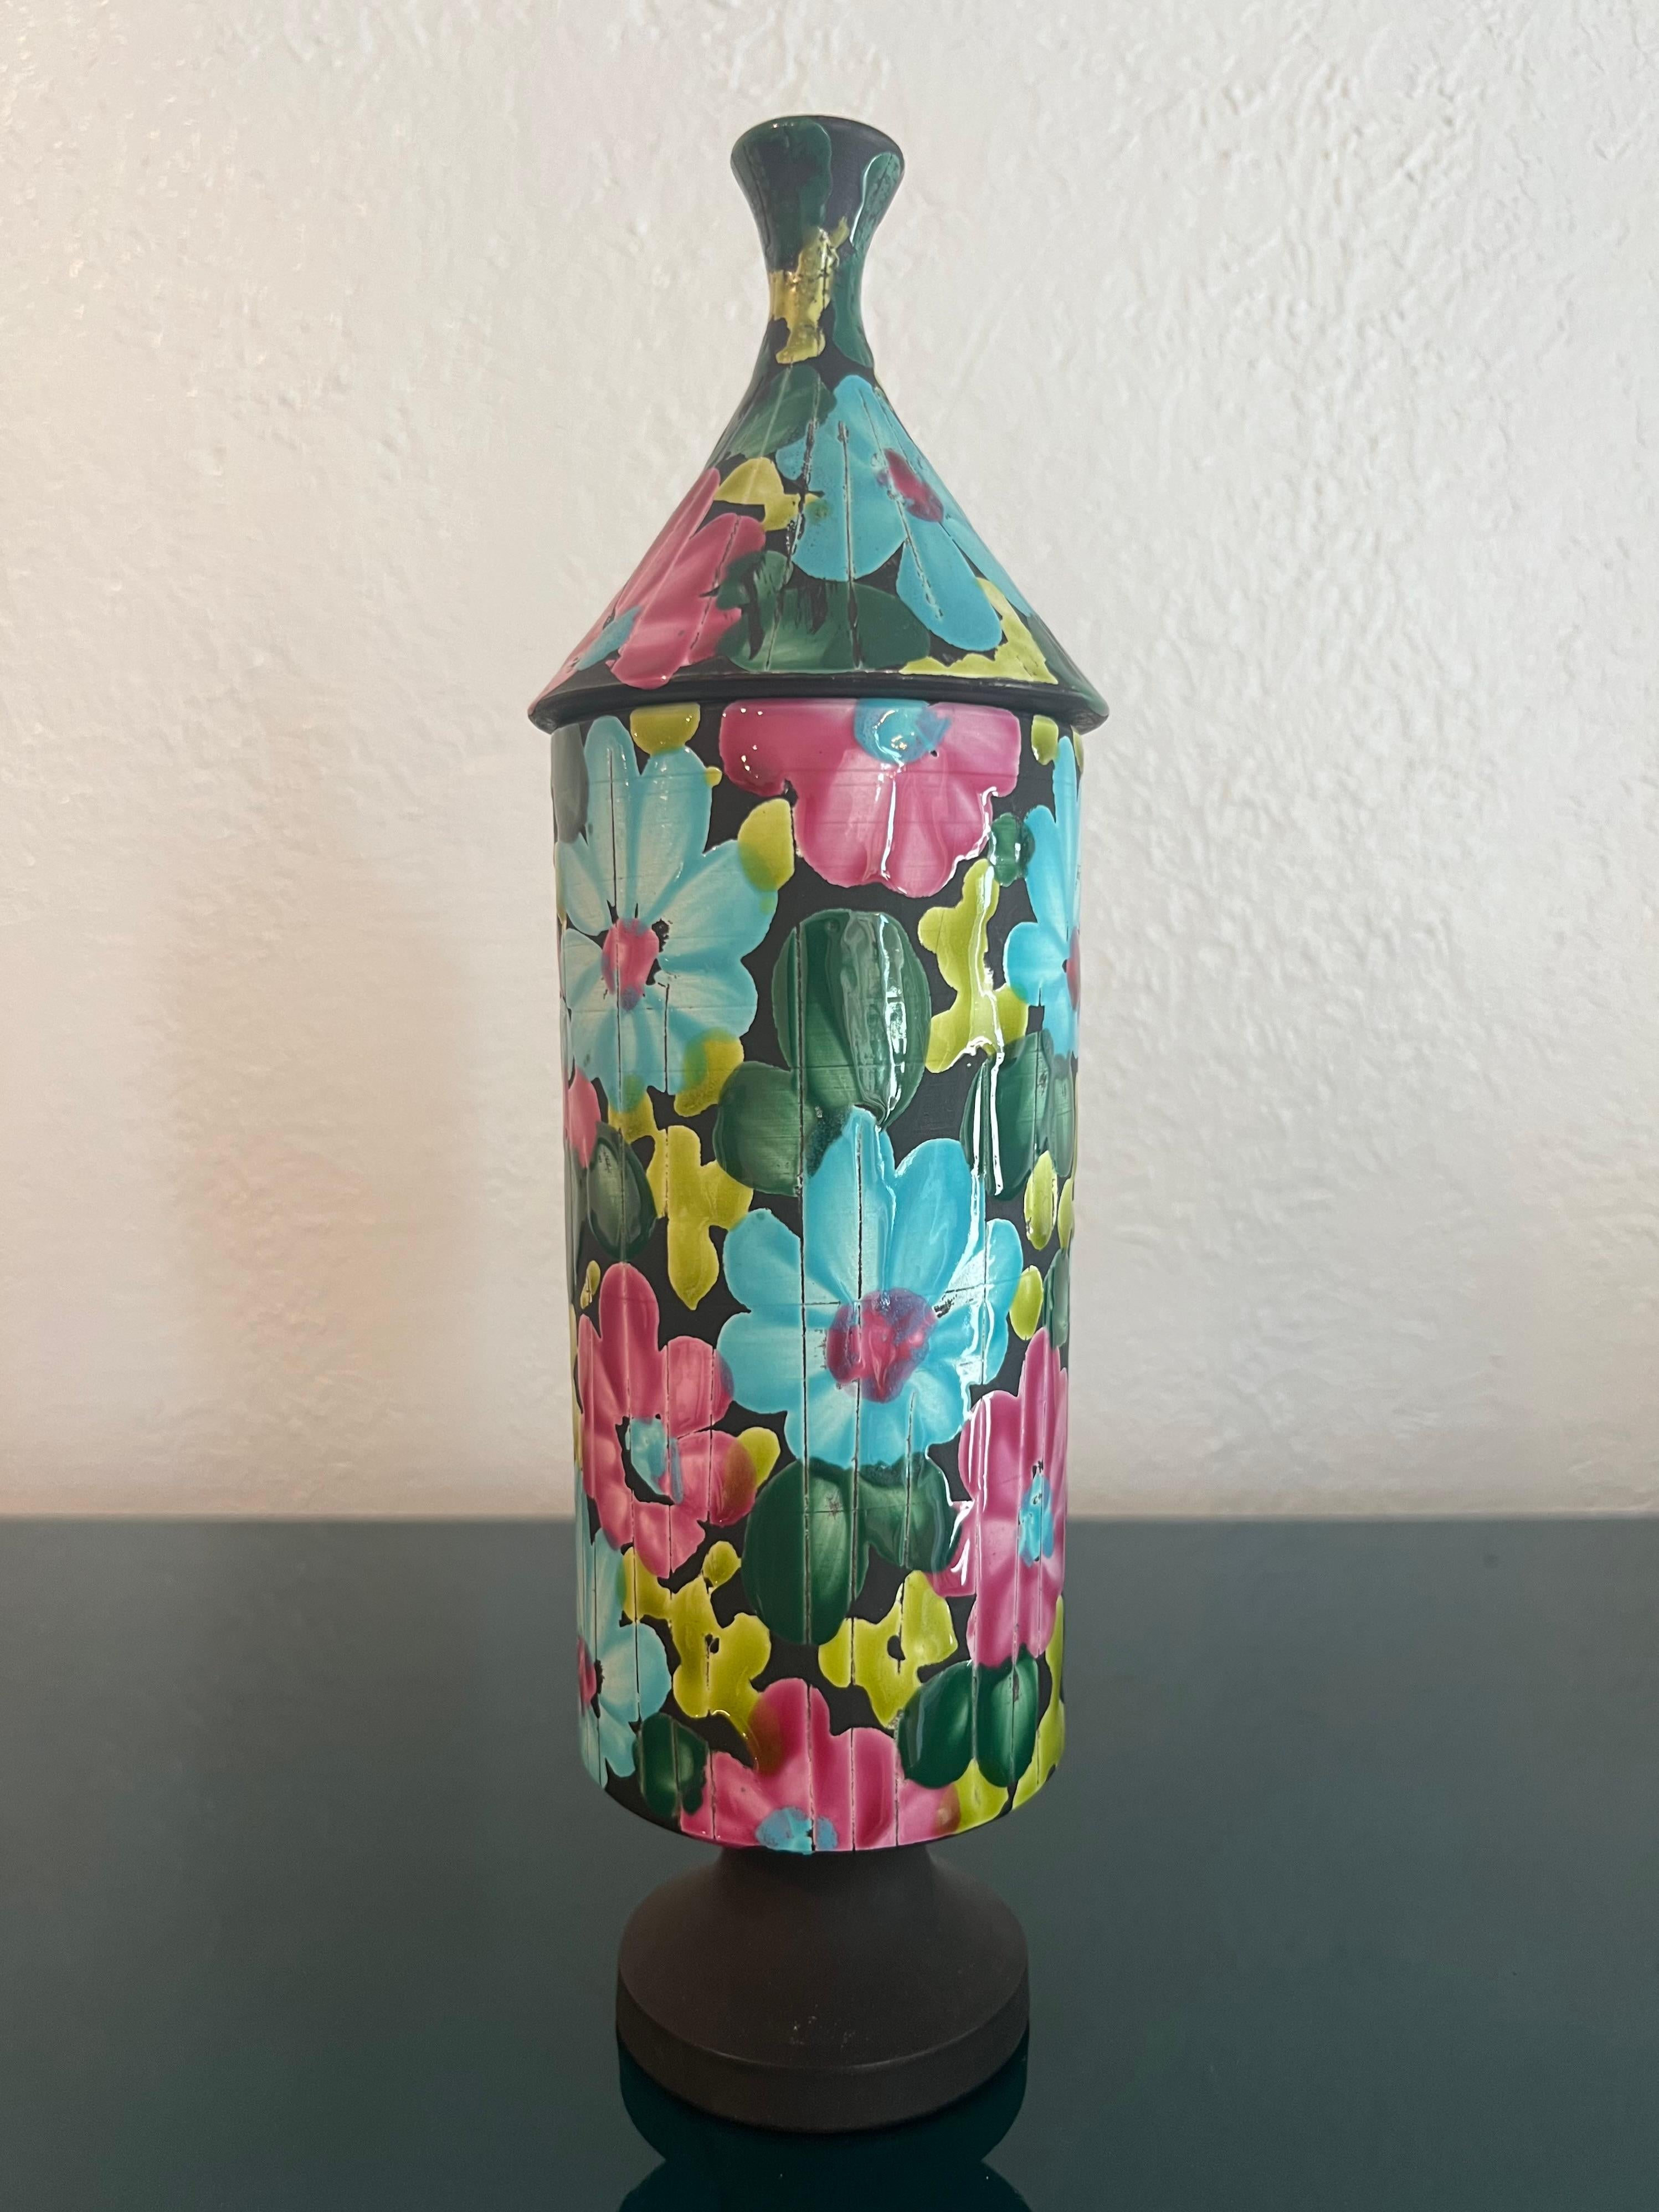 Alvino Bagni lidded vase in a brilliant floral design. Small area on base where glaze did not catch (please refer to photos). Additional photos available upon request.

Would work well in a variety of interiors such as modern, mid century modern,